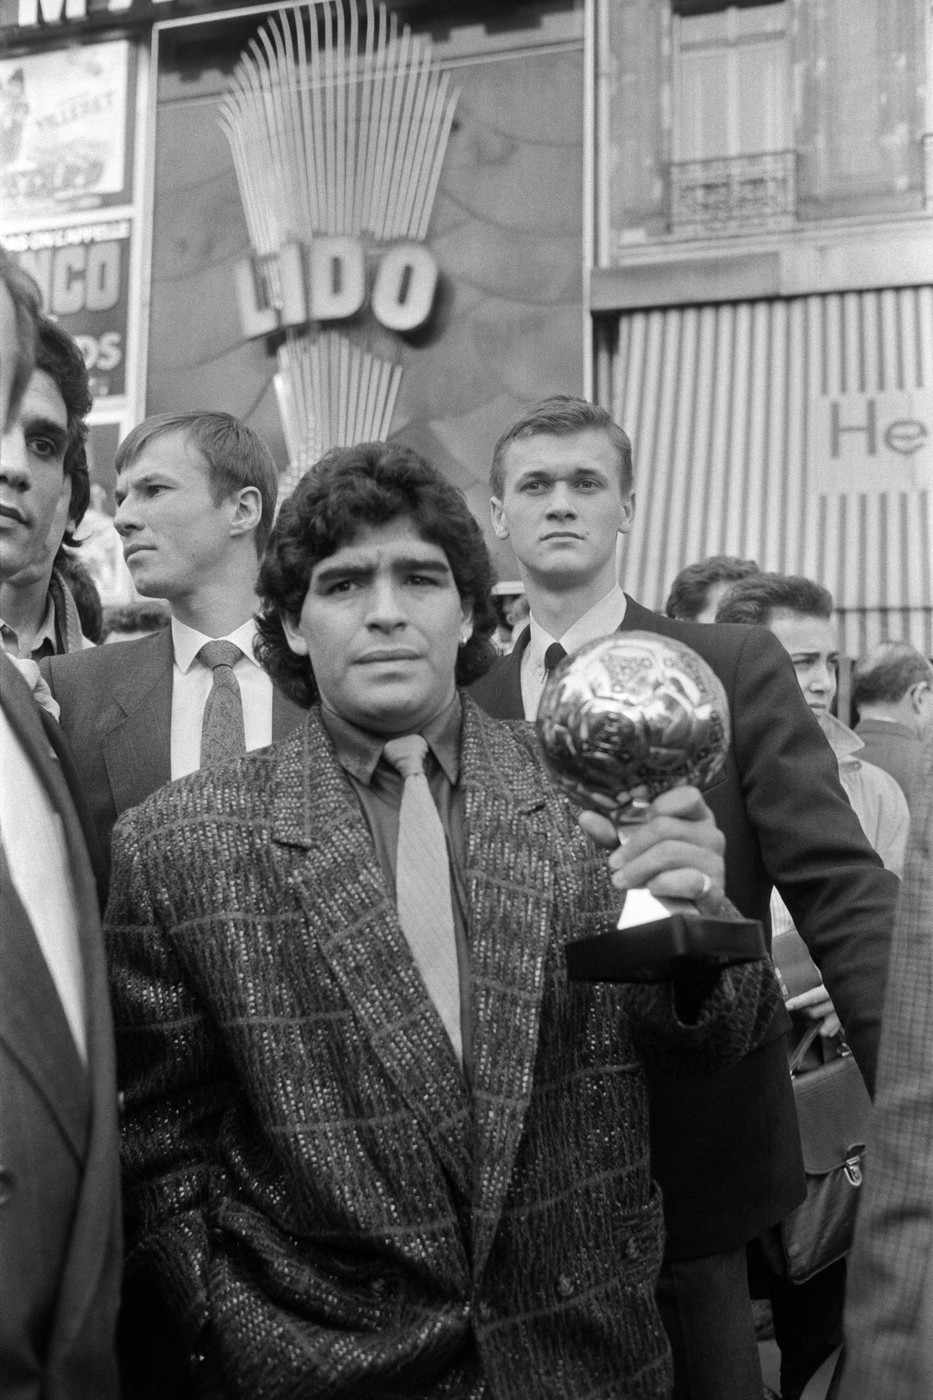 Diego Maradona poses with the Ballon d'Or in front of the Lido in Paris on November 13, 1986. He was awarded following the 1986 FIFA World Cup The Golden Ball award is presented to the best player at each FIFA World Cup finals.,Image: 800969848, License: Rights-managed, Restrictions: , Model Release: no